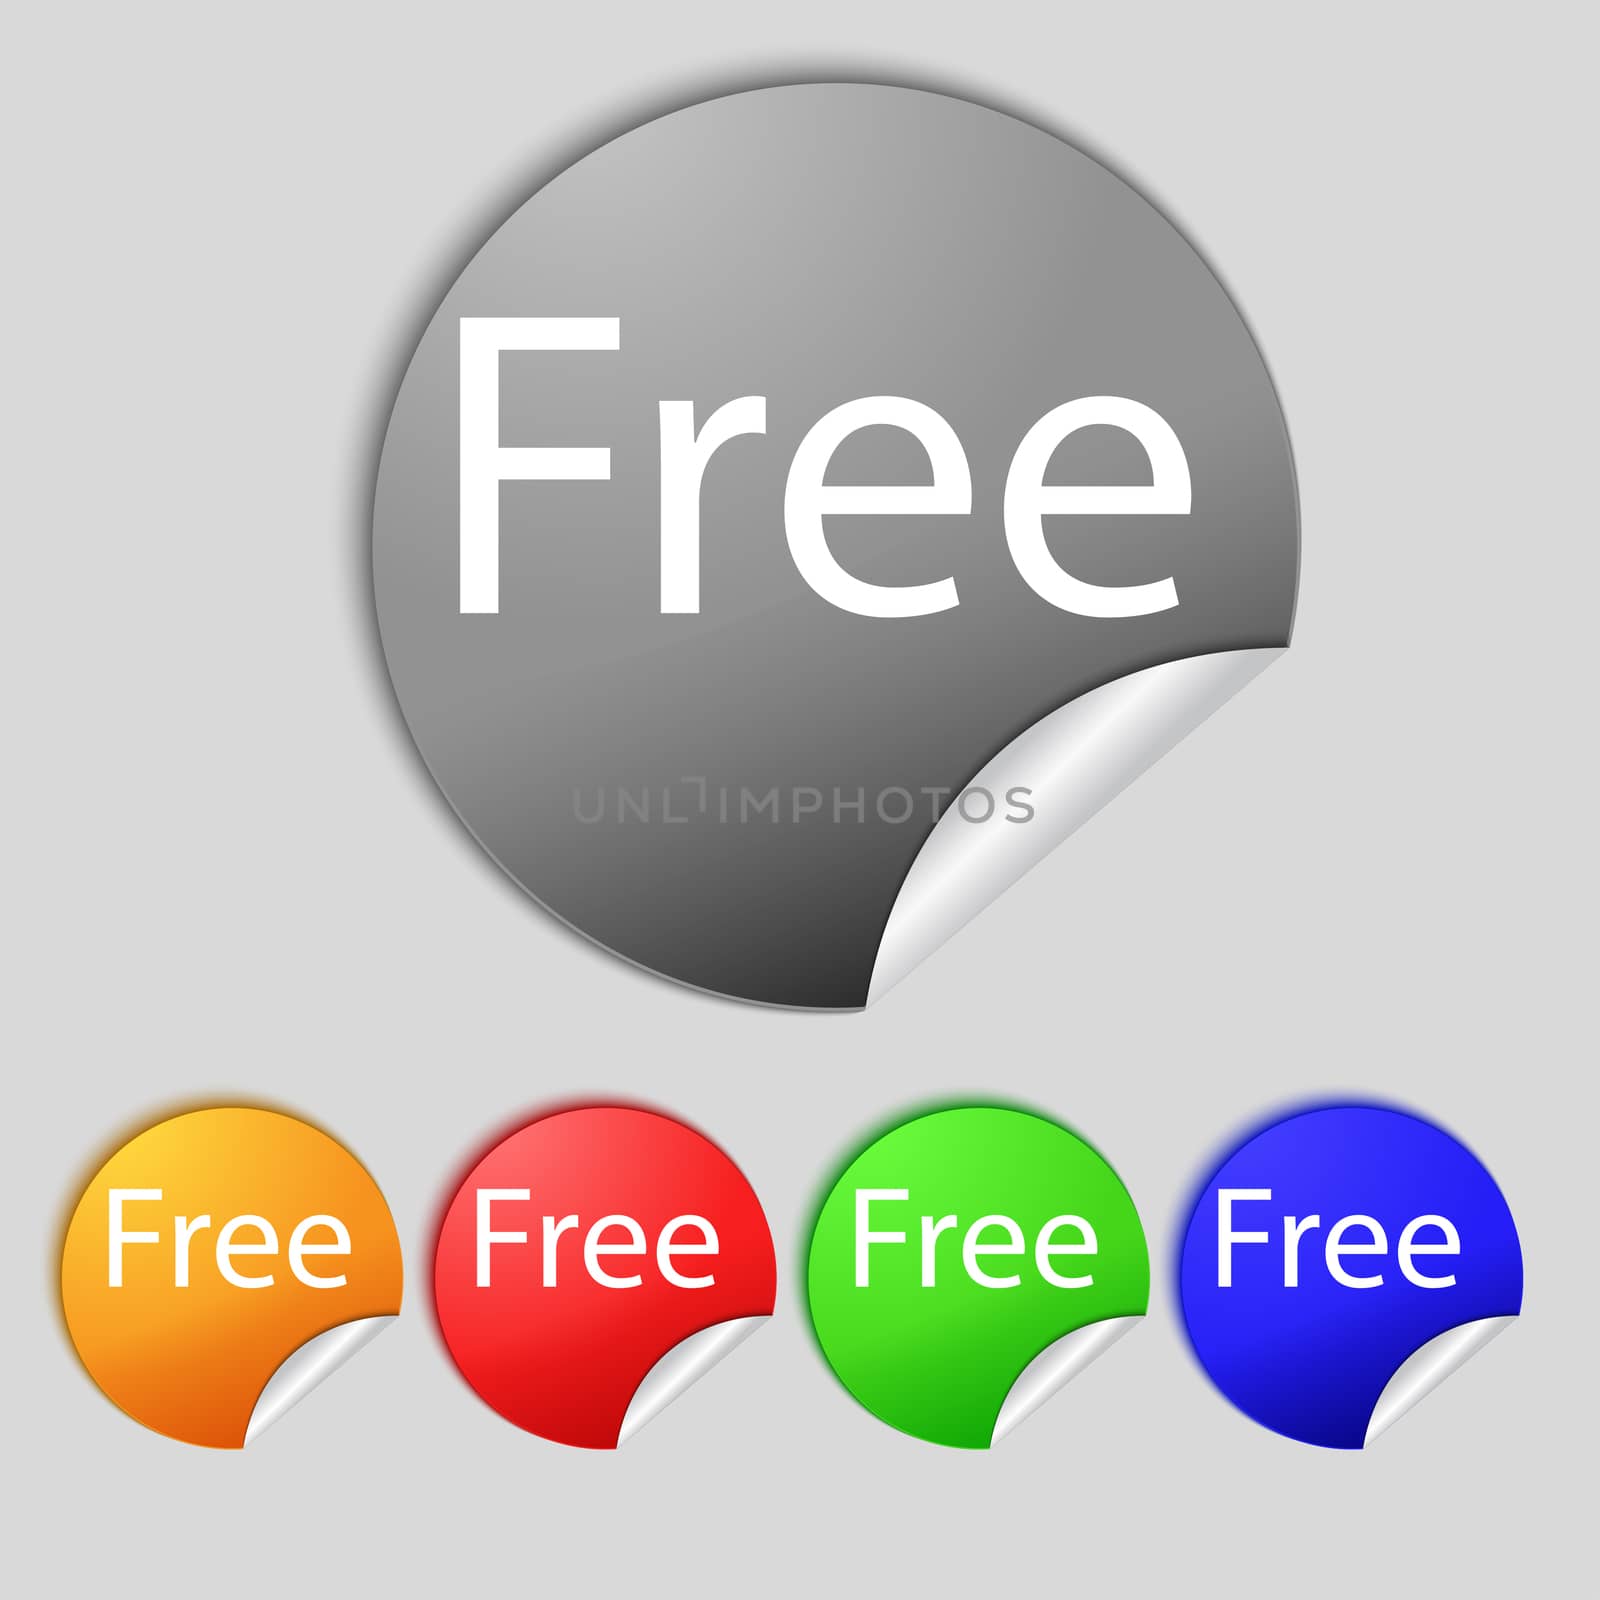 Free sign icon. Special offer symbol. Set of colored buttons. illustration